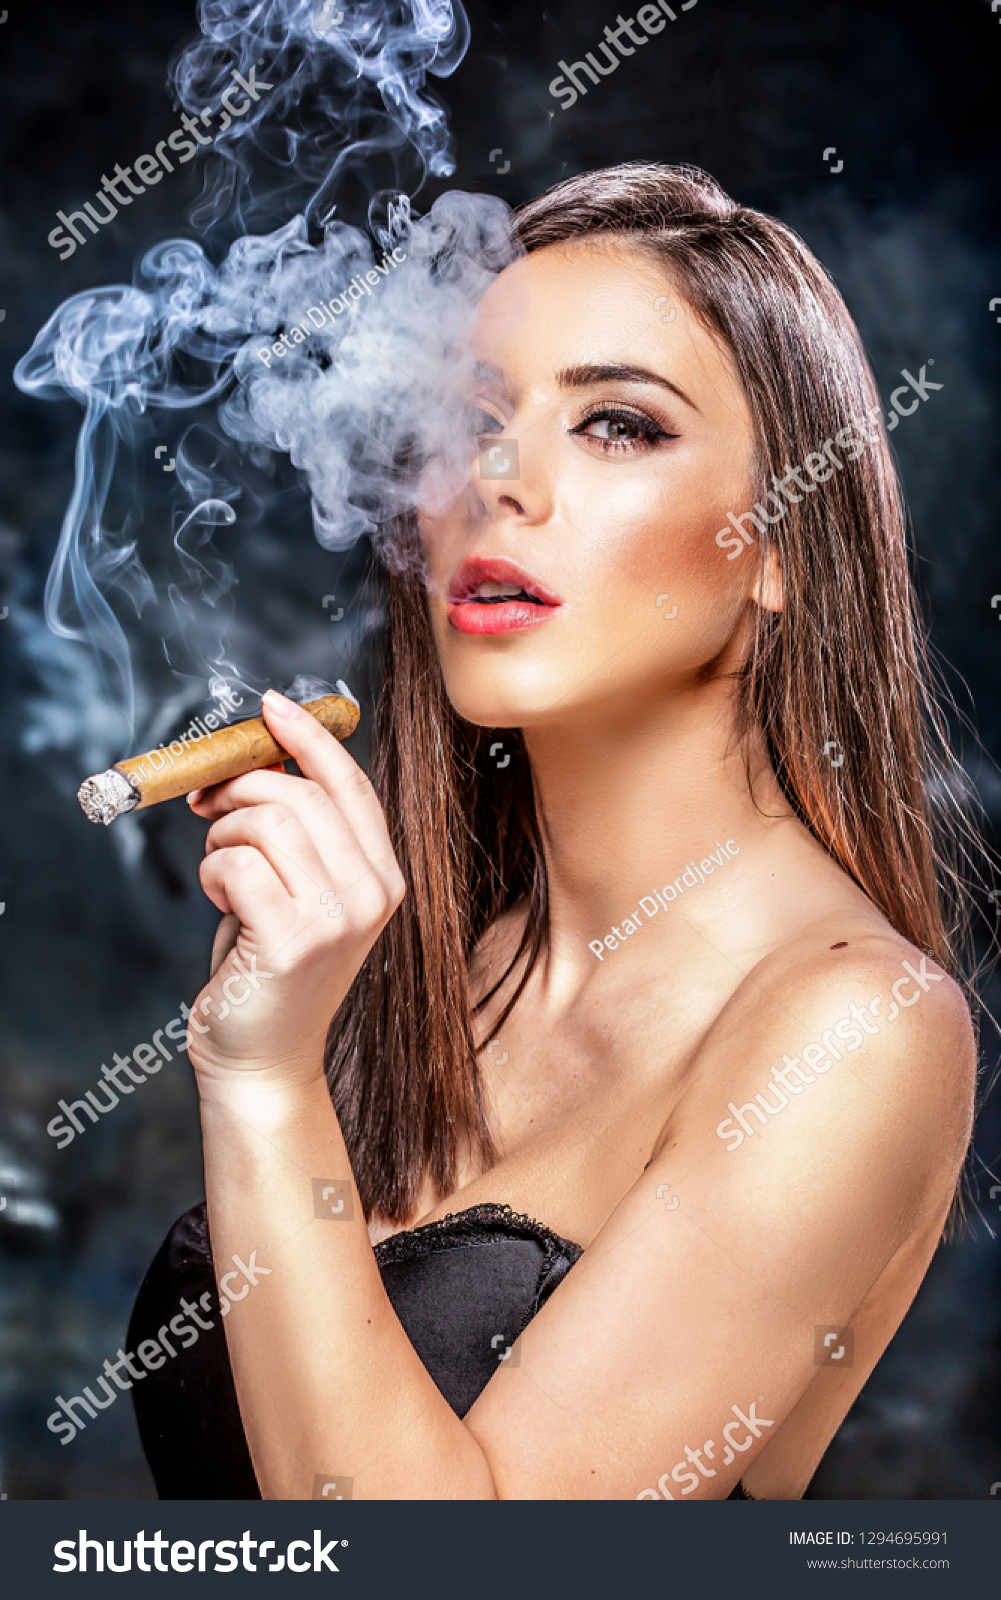 Cigar Smoking Babe Shows It All